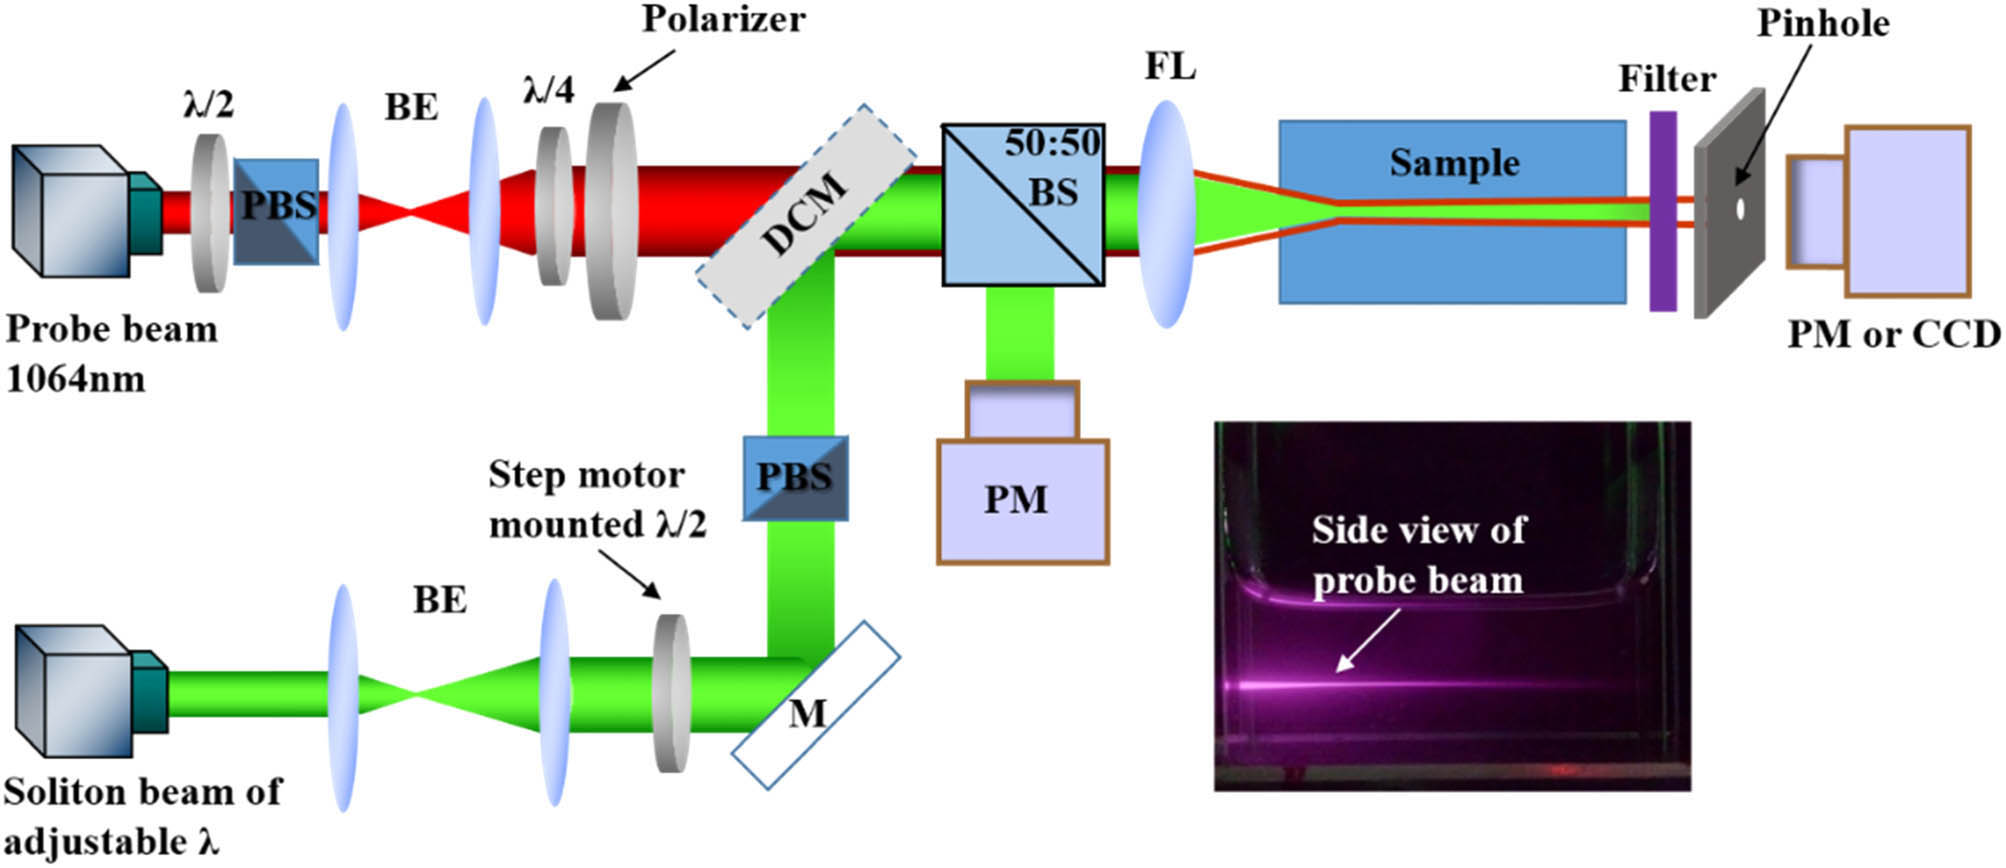 Schematic of the experimental setup. A linearly polarized 1064 nm probe beam is sent through a soliton channel created by a pump beam of tunable wavelength from 700 to 960 nm in a suspension of gold nanorods. The polarizer before the dichroic mirror is to establish a linearly polarized light for the probe beam. BE, beam expander; DCM, dichroic mirror; FL, focusing lens; M, mirror; PBS, polarizing beam splitter; PM, powermeter. The insert shows the guidance of an infrared probe beam of 1064 nm wavelength through a 4-cm-long cuvette of gold nanoparticle suspension by a soliton-induced waveguide formed typically at a visible wavelength of 532 nm.